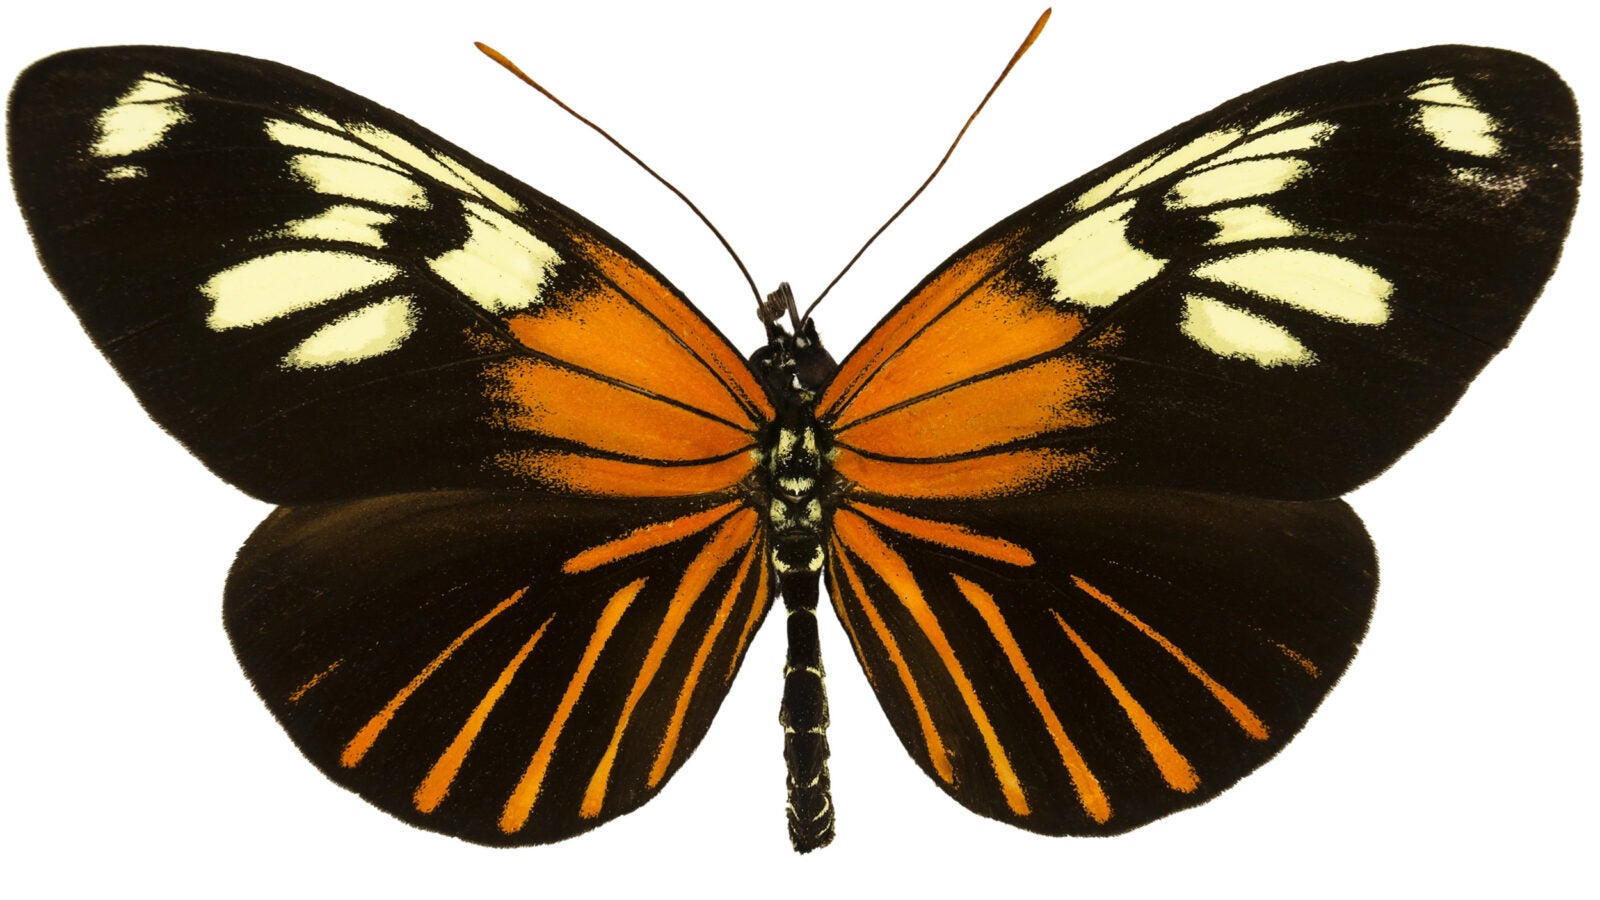 Heliconius xanthocles butterfly illustration with wings spread.